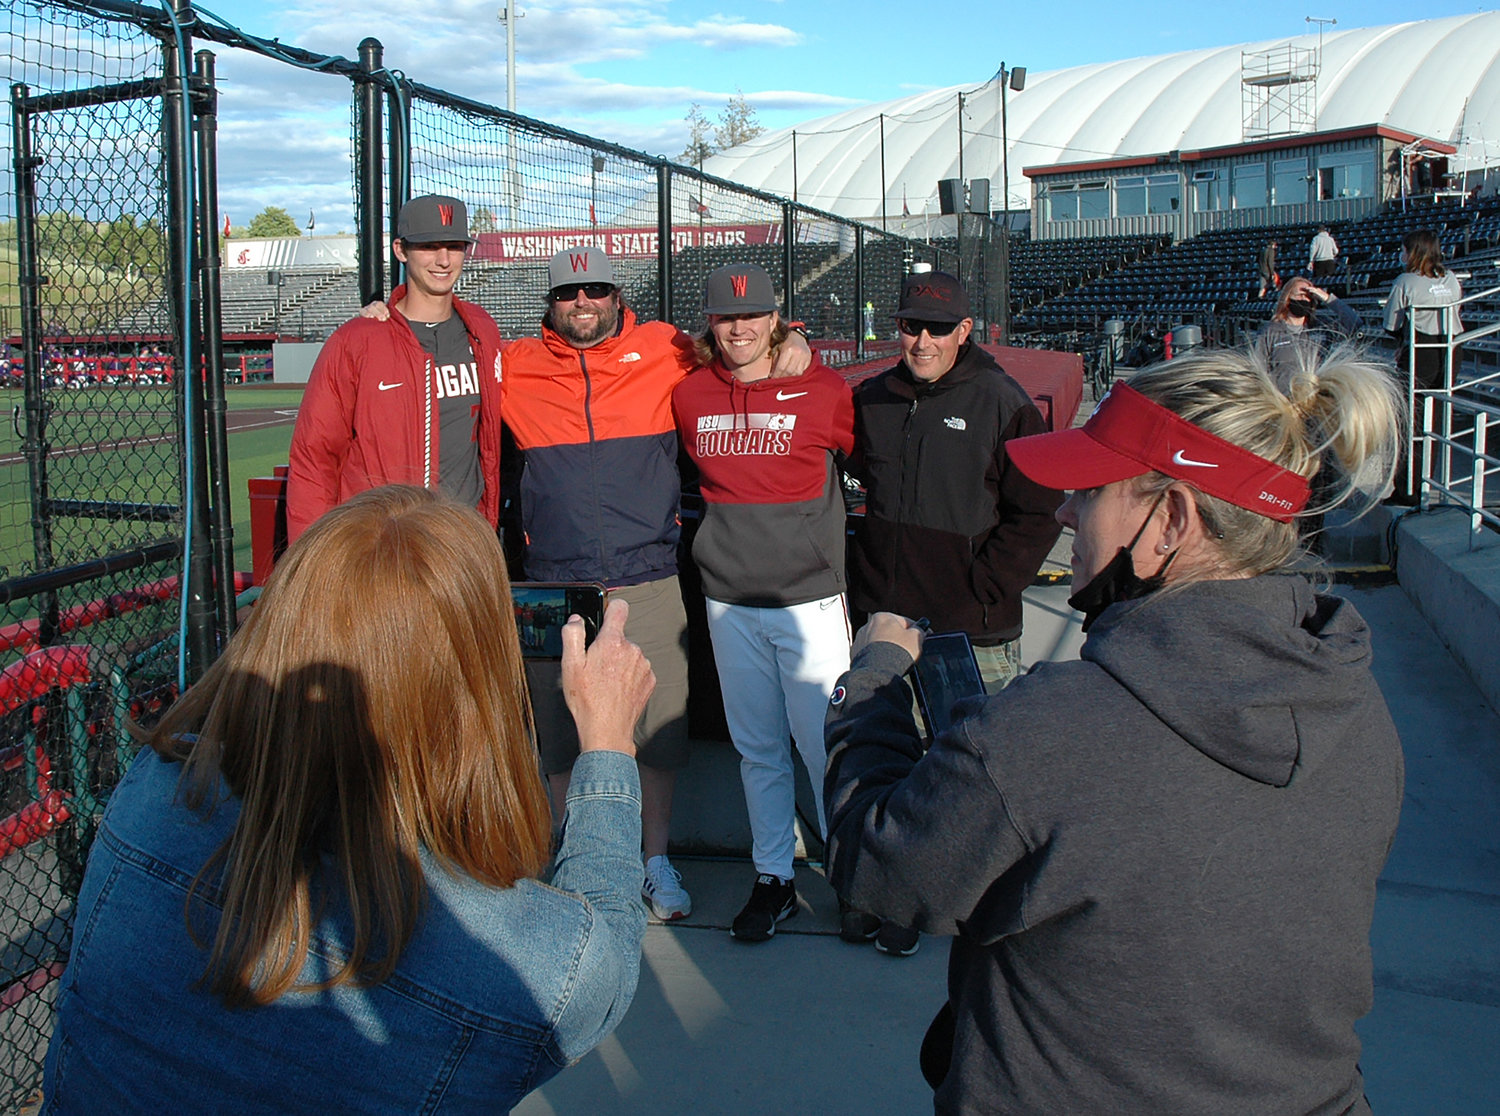 From left, Brandon White, Jason Kelley, Dakota Hawkins, and Bryan Bullock pose for a photo in Pullman after Washington State's game against the University of Washington on May 29. White and Hawkins were teammates at W.F. West High School, where Bullock was the head baseball coach and Kelley was an assistant coach.